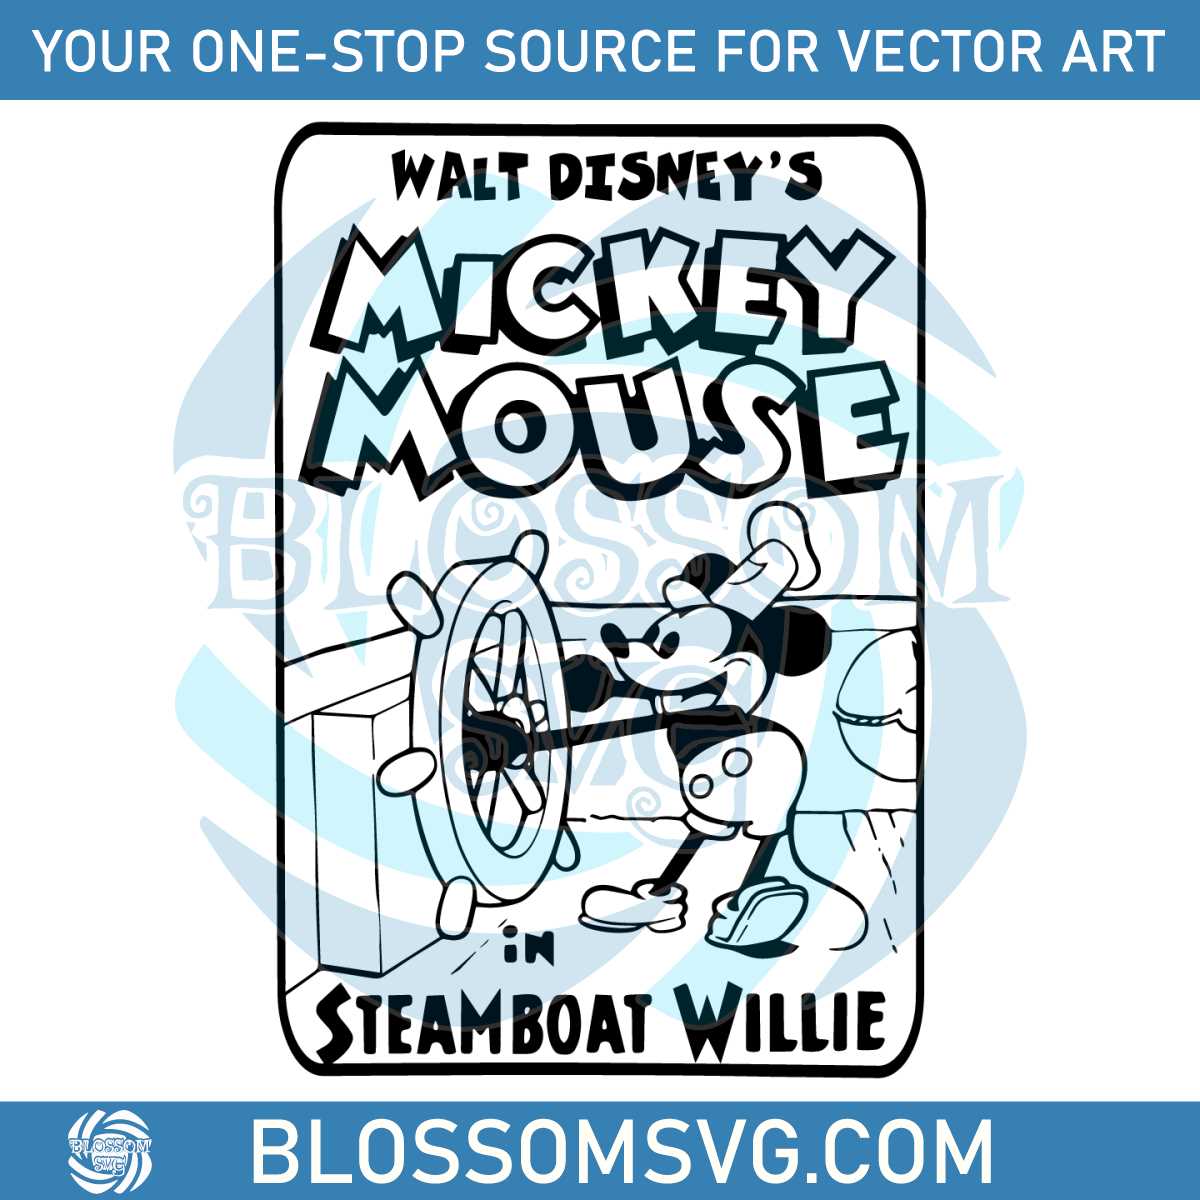 mickey-mouse-steamboat-willie-svg